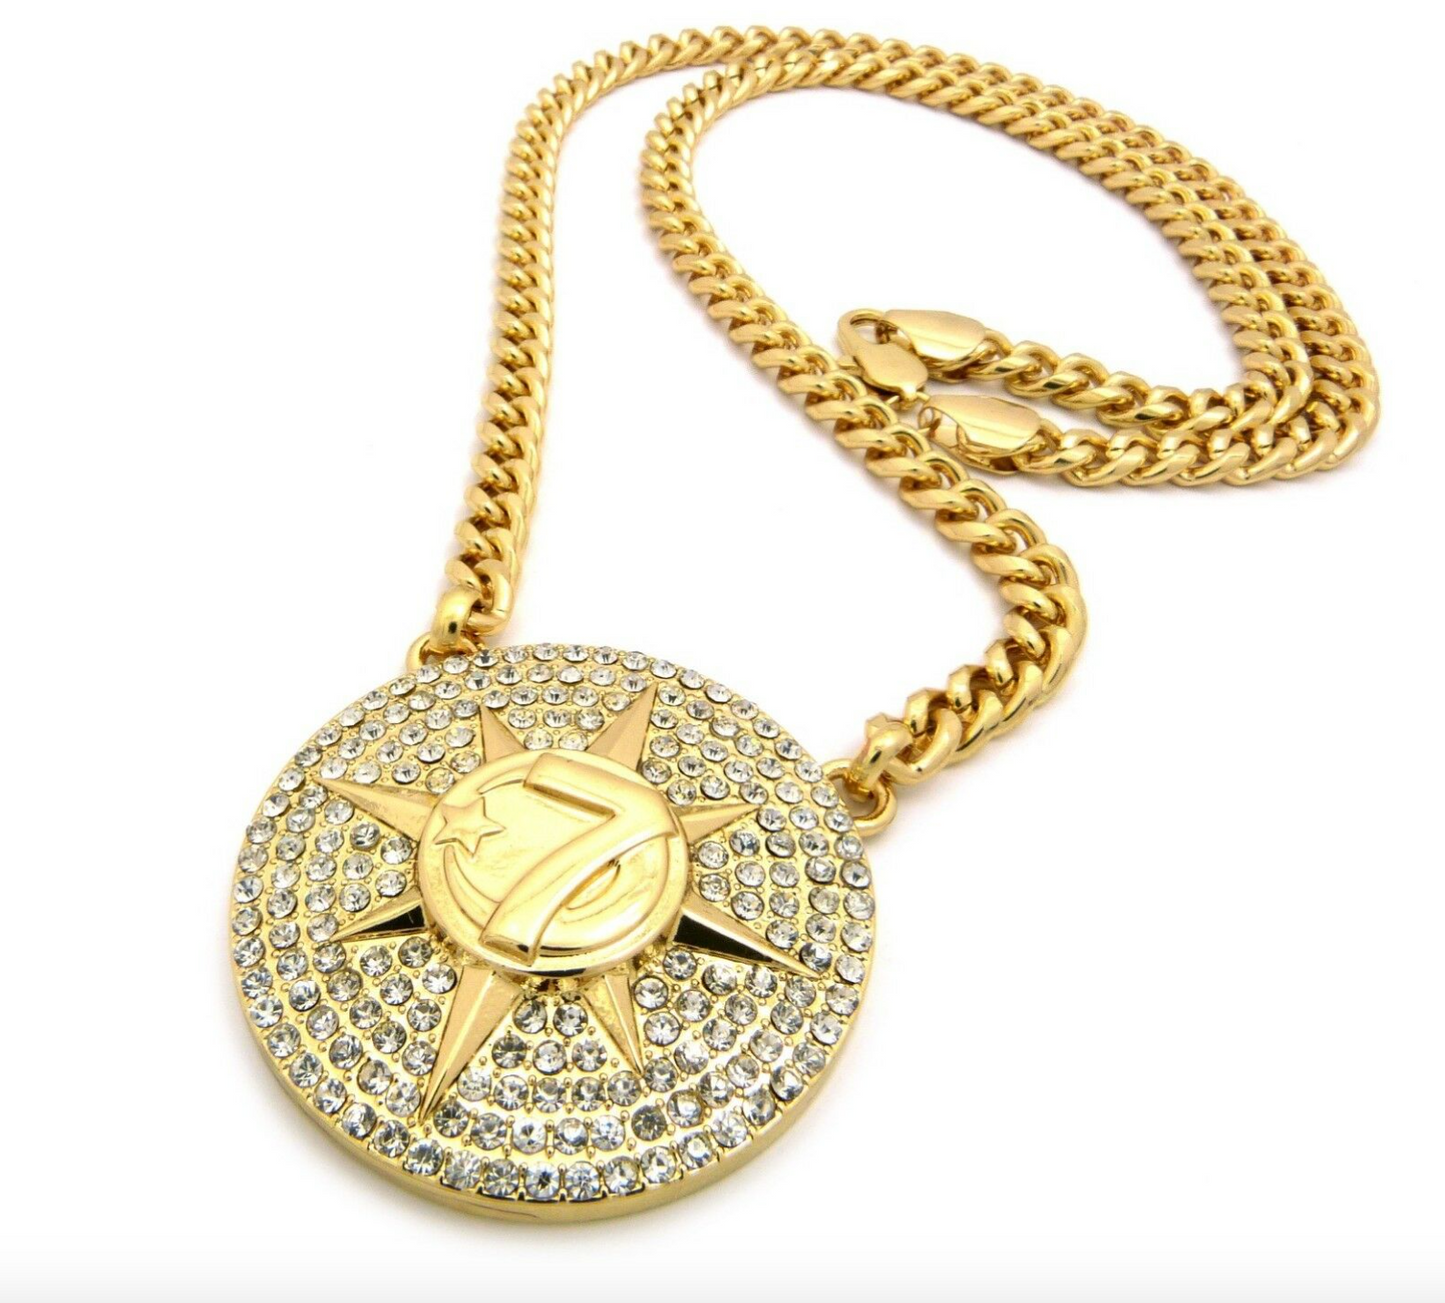 Simulated Diamond 7 Star 5 Percenter Pendant Allah Jewelry Hip Hop Necklace Muslim Jay Z Chain NOI Gold Color Metal Alloy 30in.